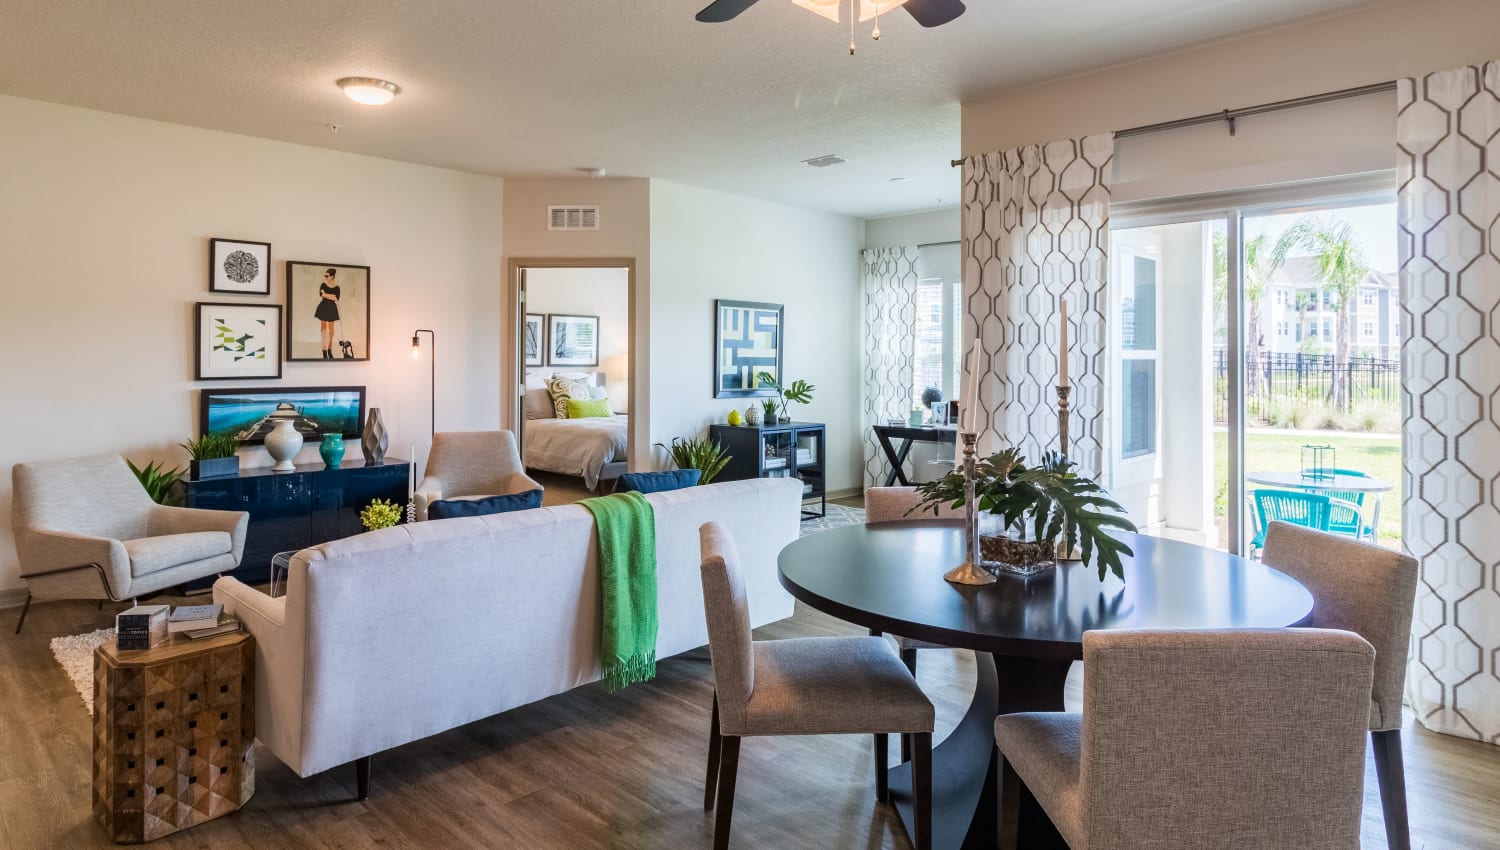 Dining nook and living room with large windows at The Carlton at Bartram Park in Jacksonville, Florida